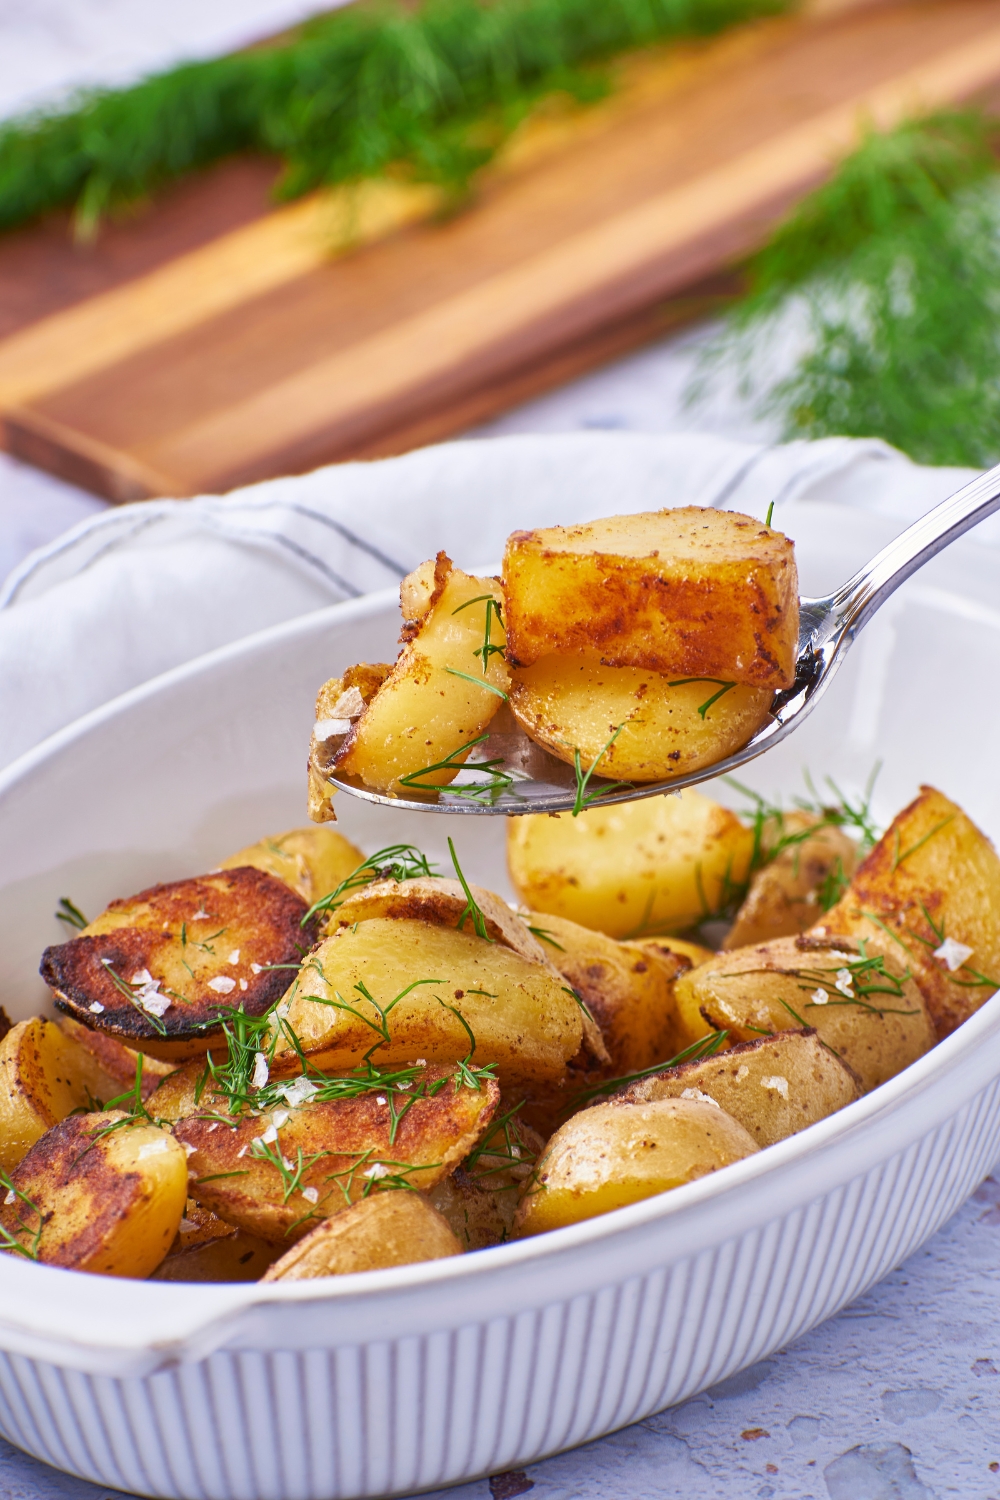 A dish of cooked potatoes seasoned with salt and fresh dill and a spoonful of potatoes being scooped out of the dish.